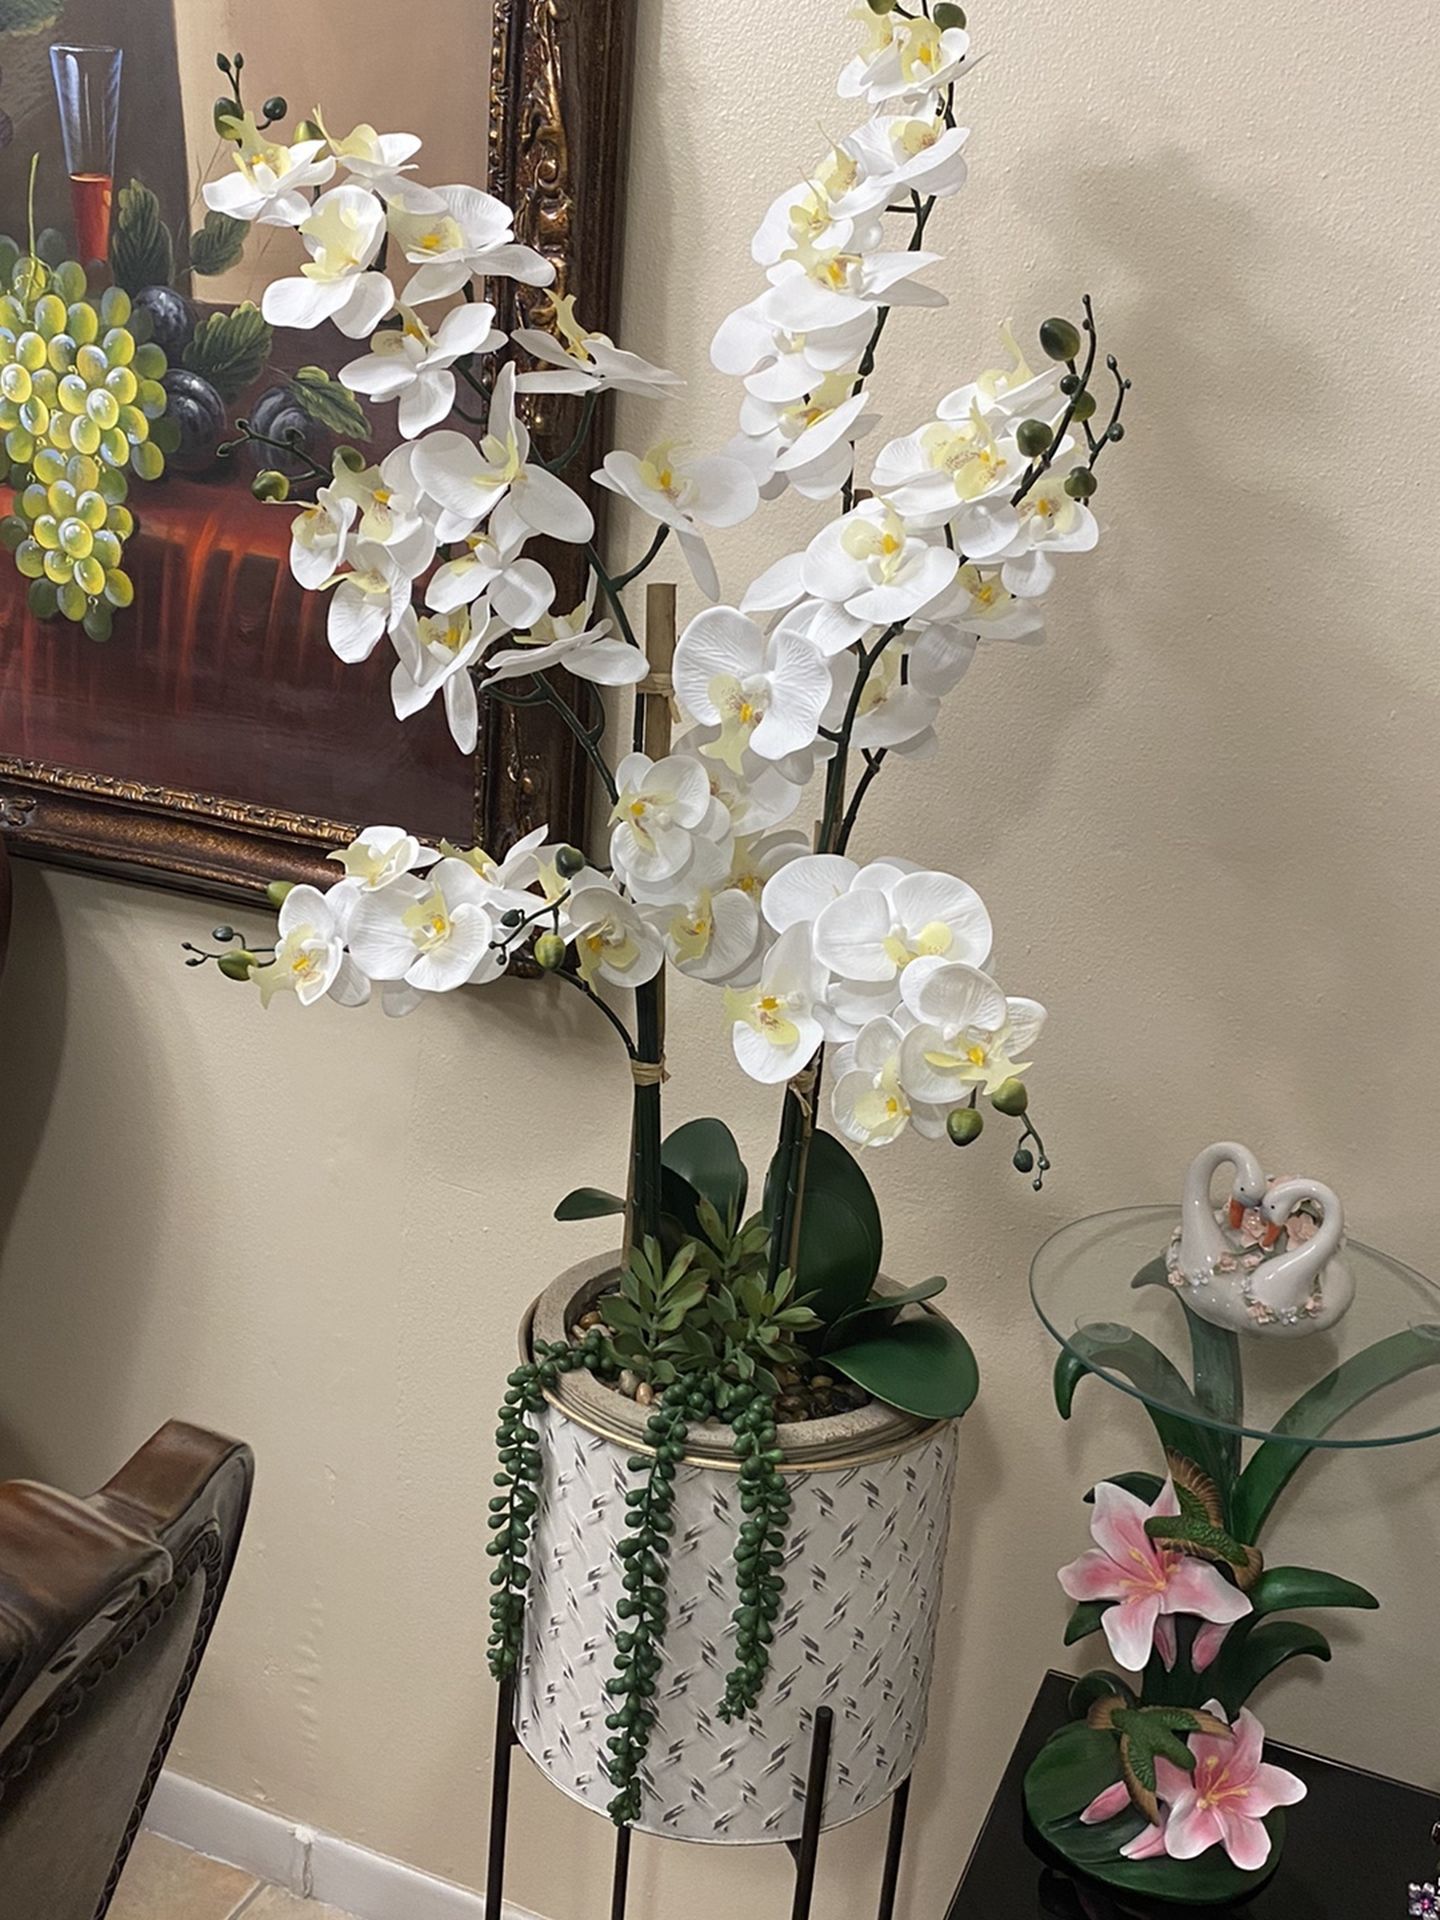 Orchid Arreglament With Vase New Condition $50